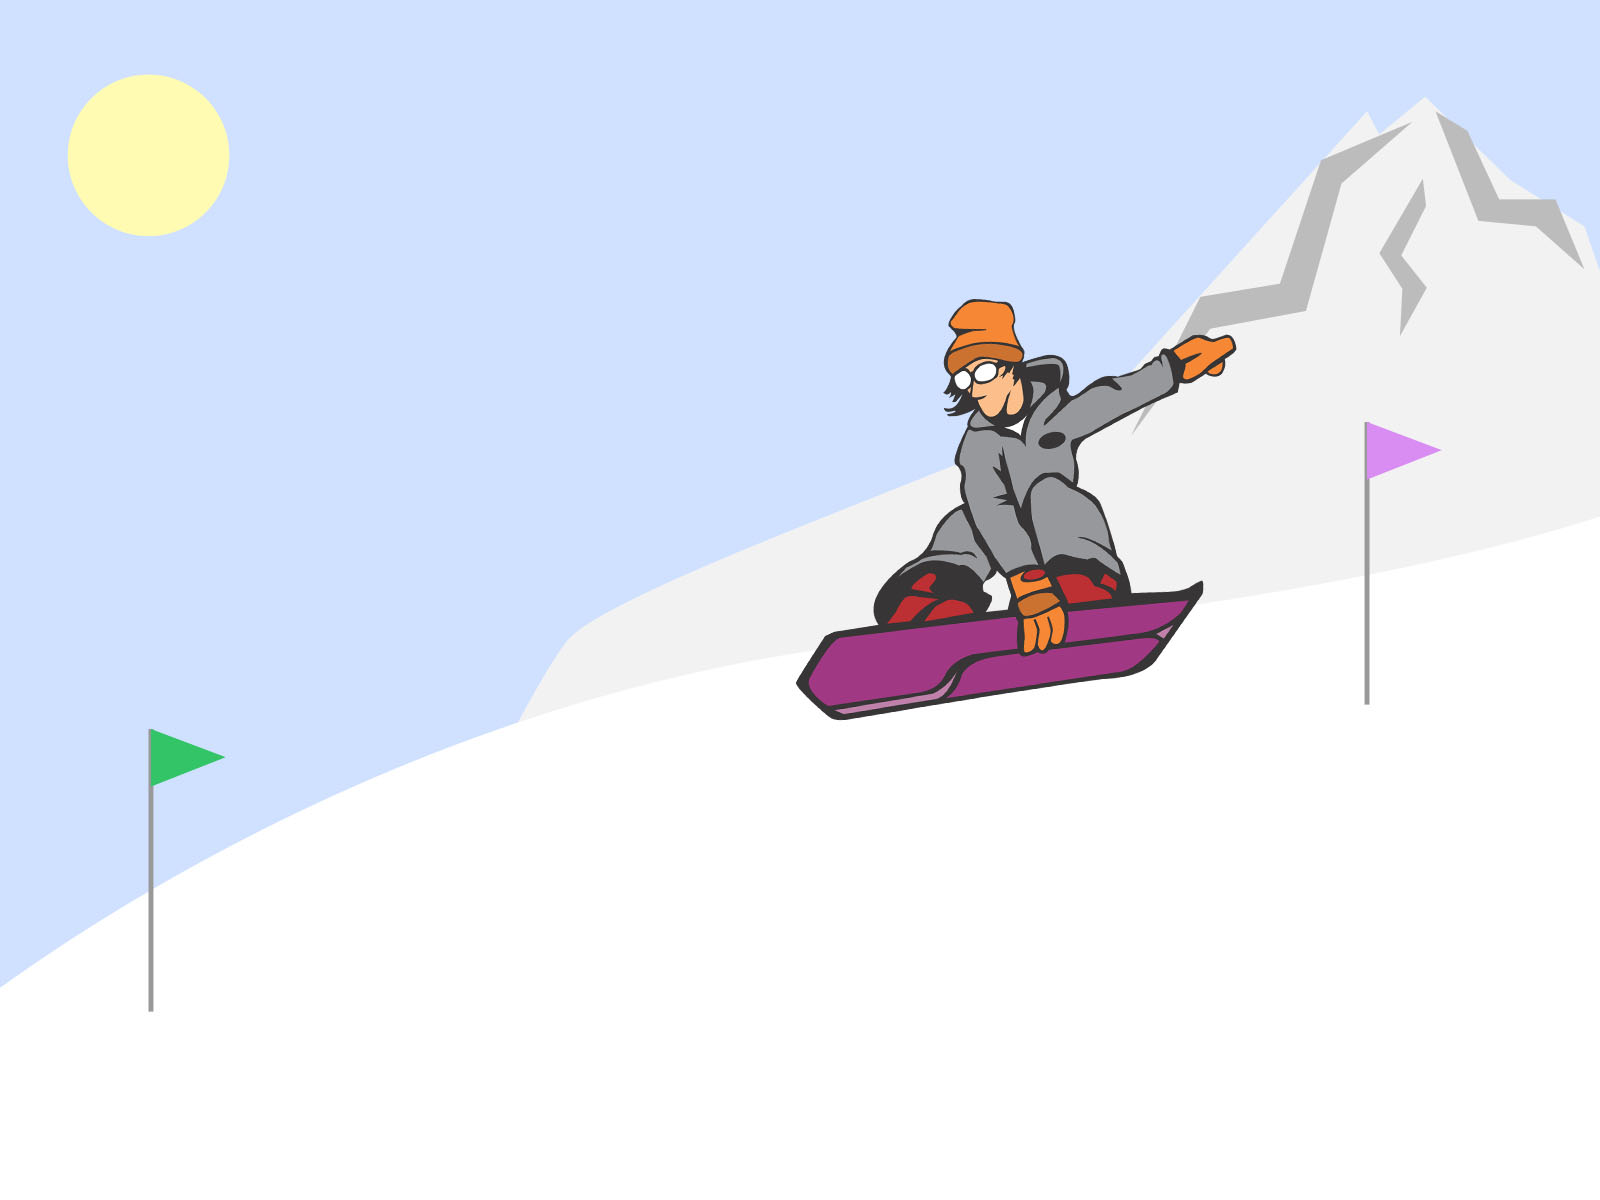 Snow Boarder Backgrounds for Powerpoint Templates - PPT Backgrounds